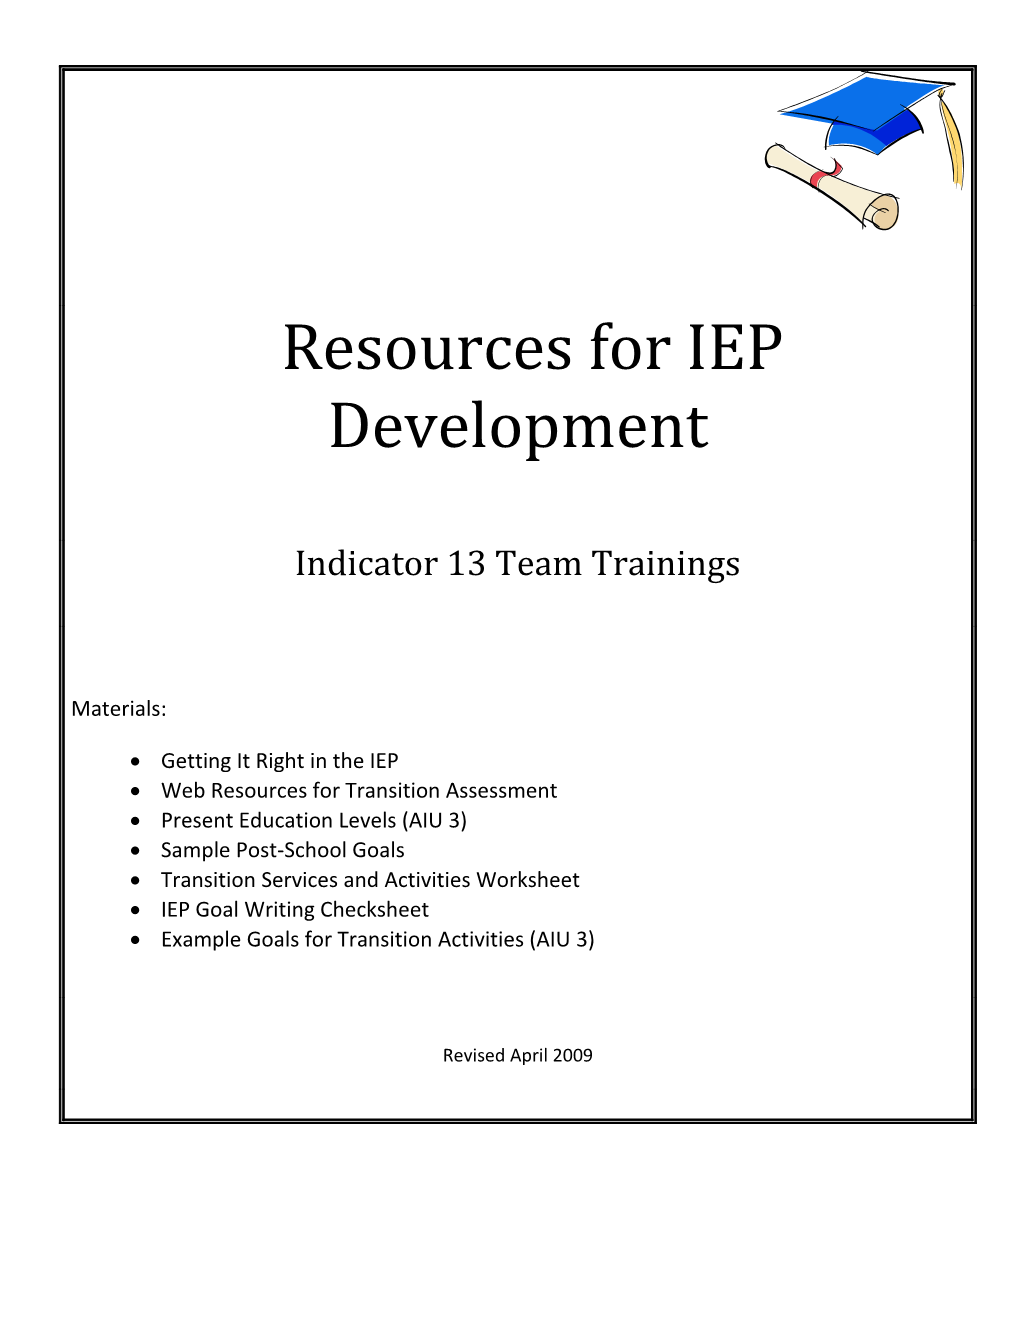 Getting It Right in the IEP